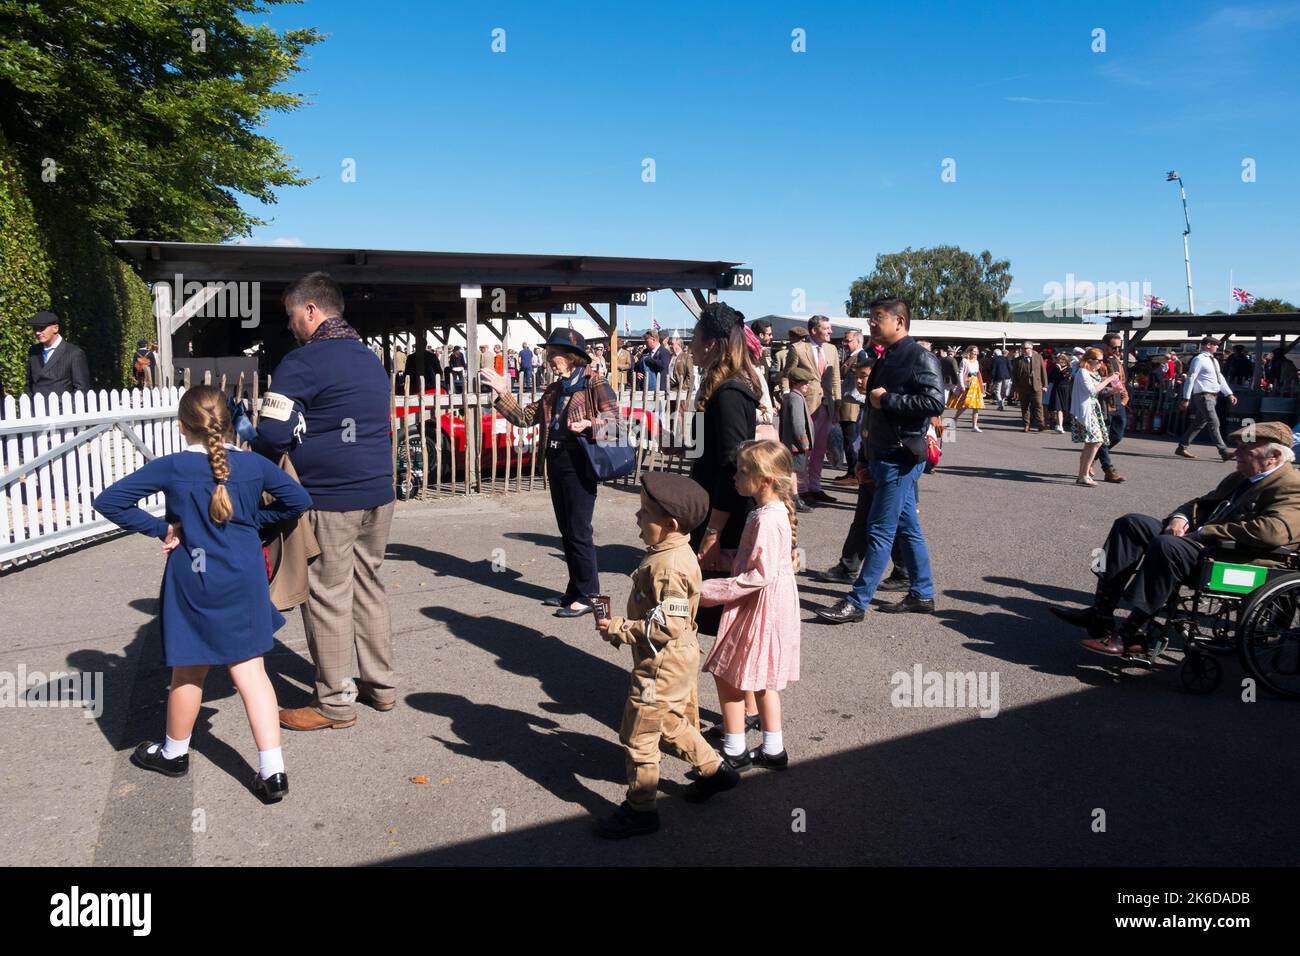 Families in period dress in the paddock at the BARC Revival Meeting at the Goodwood motor racing circuit Chichester, West Sussex, UK,September 2022 Stock Photo